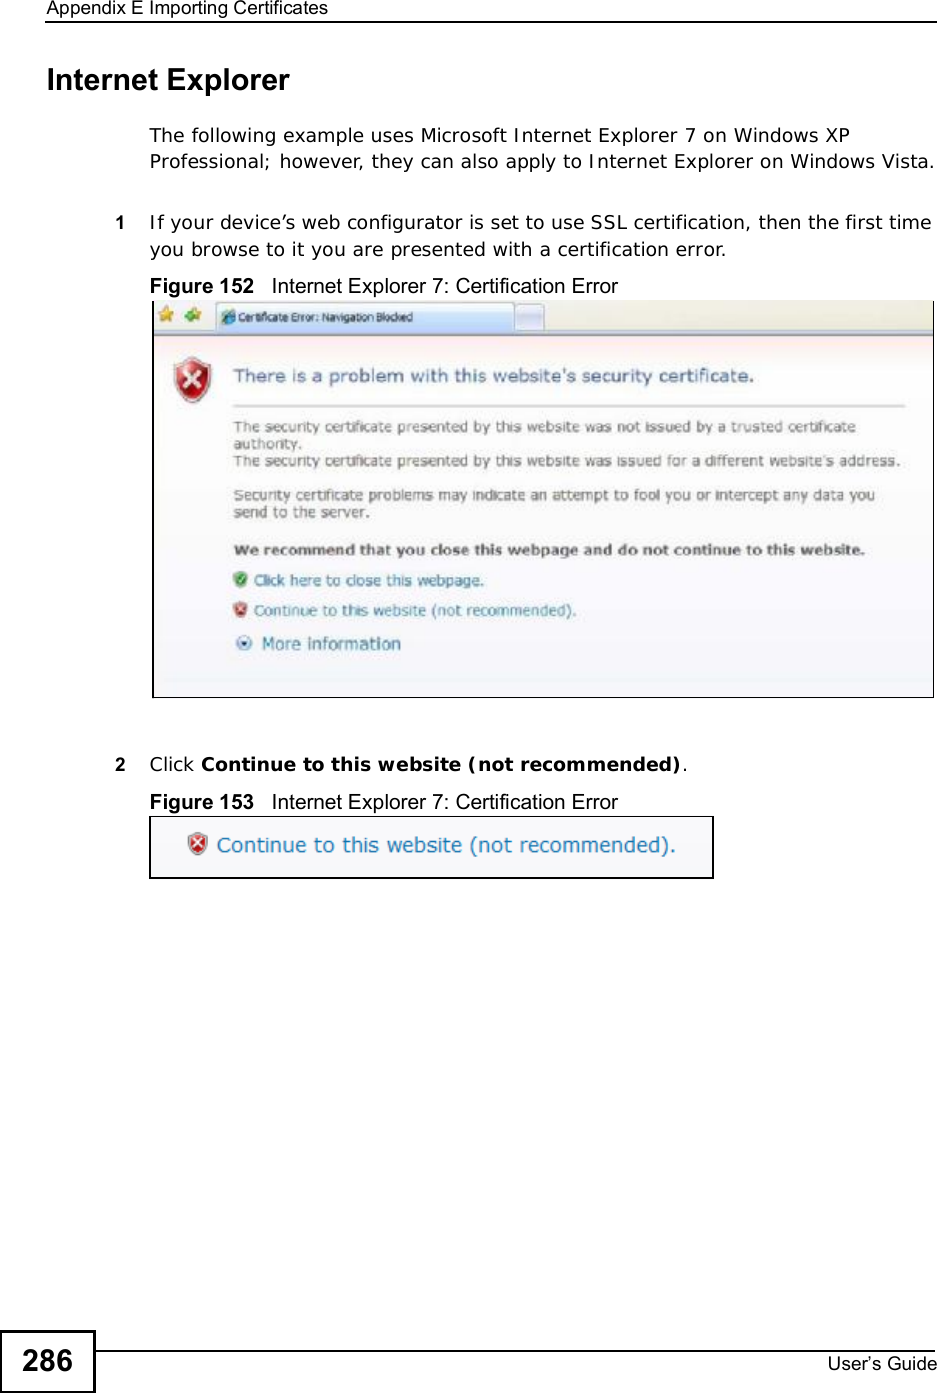 Appendix EImporting CertificatesUser s Guide286Internet ExplorerThe following example uses Microsoft Internet Explorer 7 on Windows XP Professional; however, they can also apply to Internet Explorer on Windows Vista.1If your device’s web configurator is set to use SSL certification, then the first time you browse to it you are presented with a certification error.Figure 152   Internet Explorer 7: Certification Error2Click Continue to this website (not recommended).Figure 153   Internet Explorer 7: Certification Error